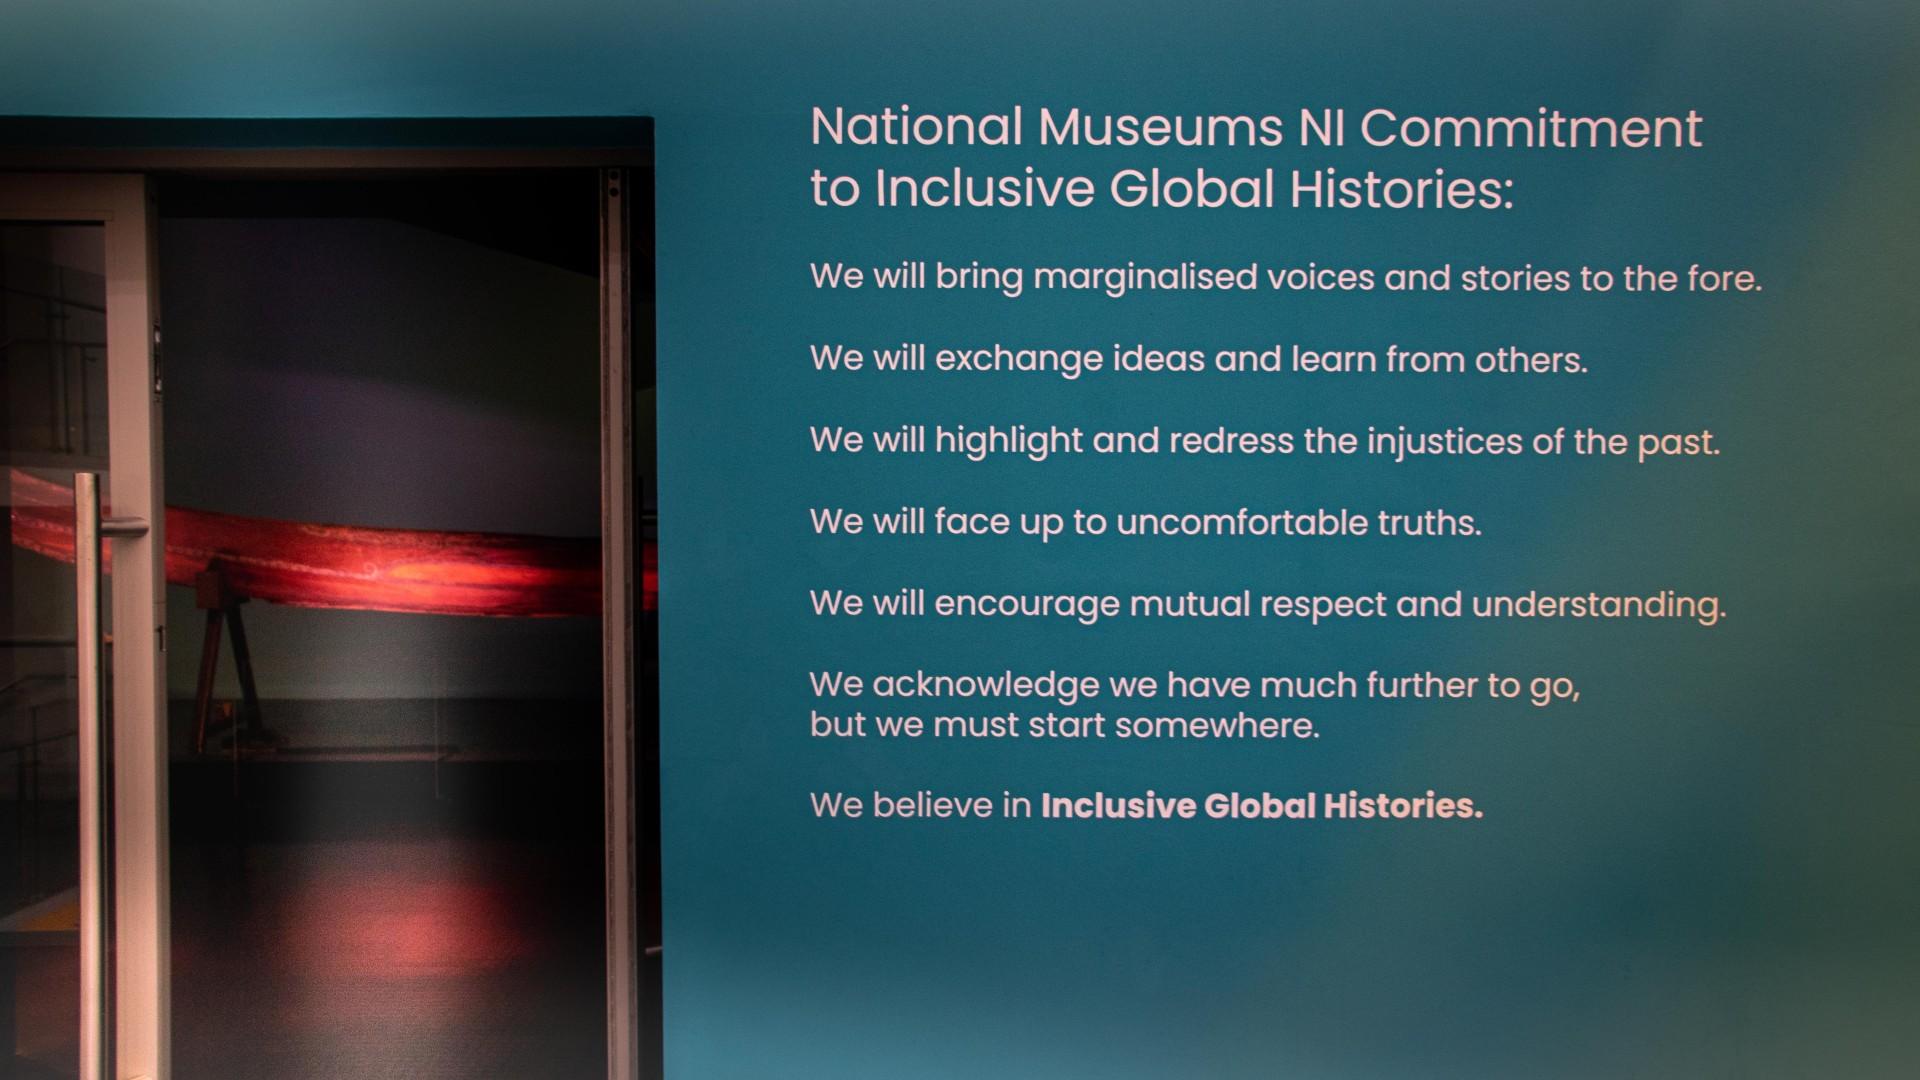 Inclusive Global Histories Commitments